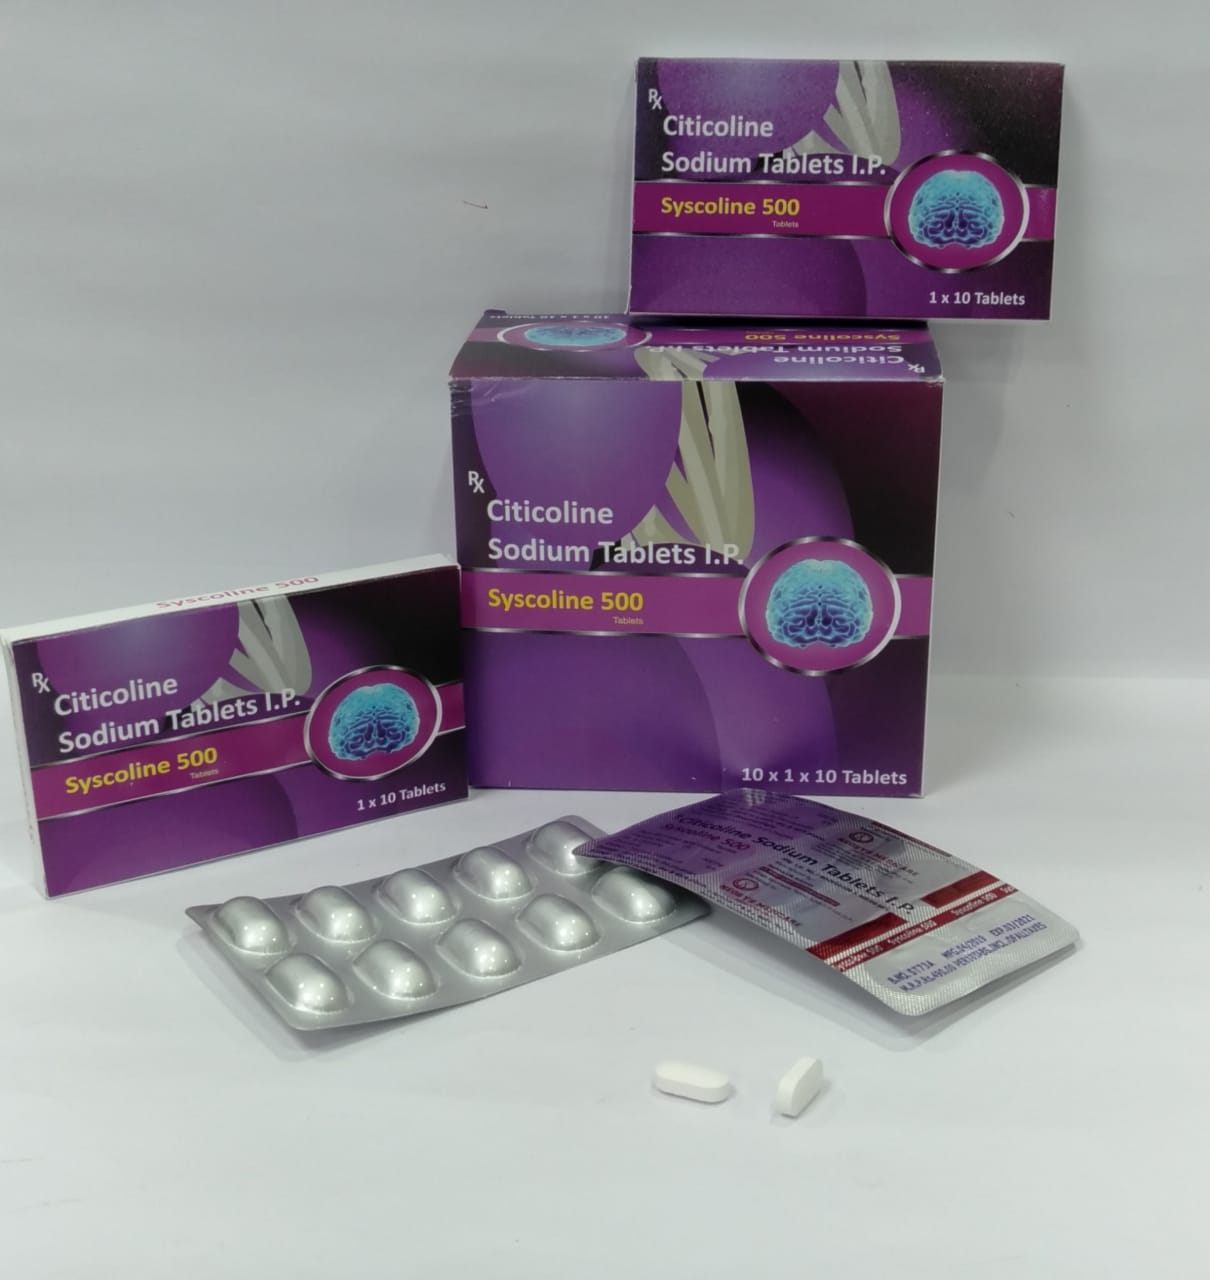 SYSCOLINE 500 TABLET